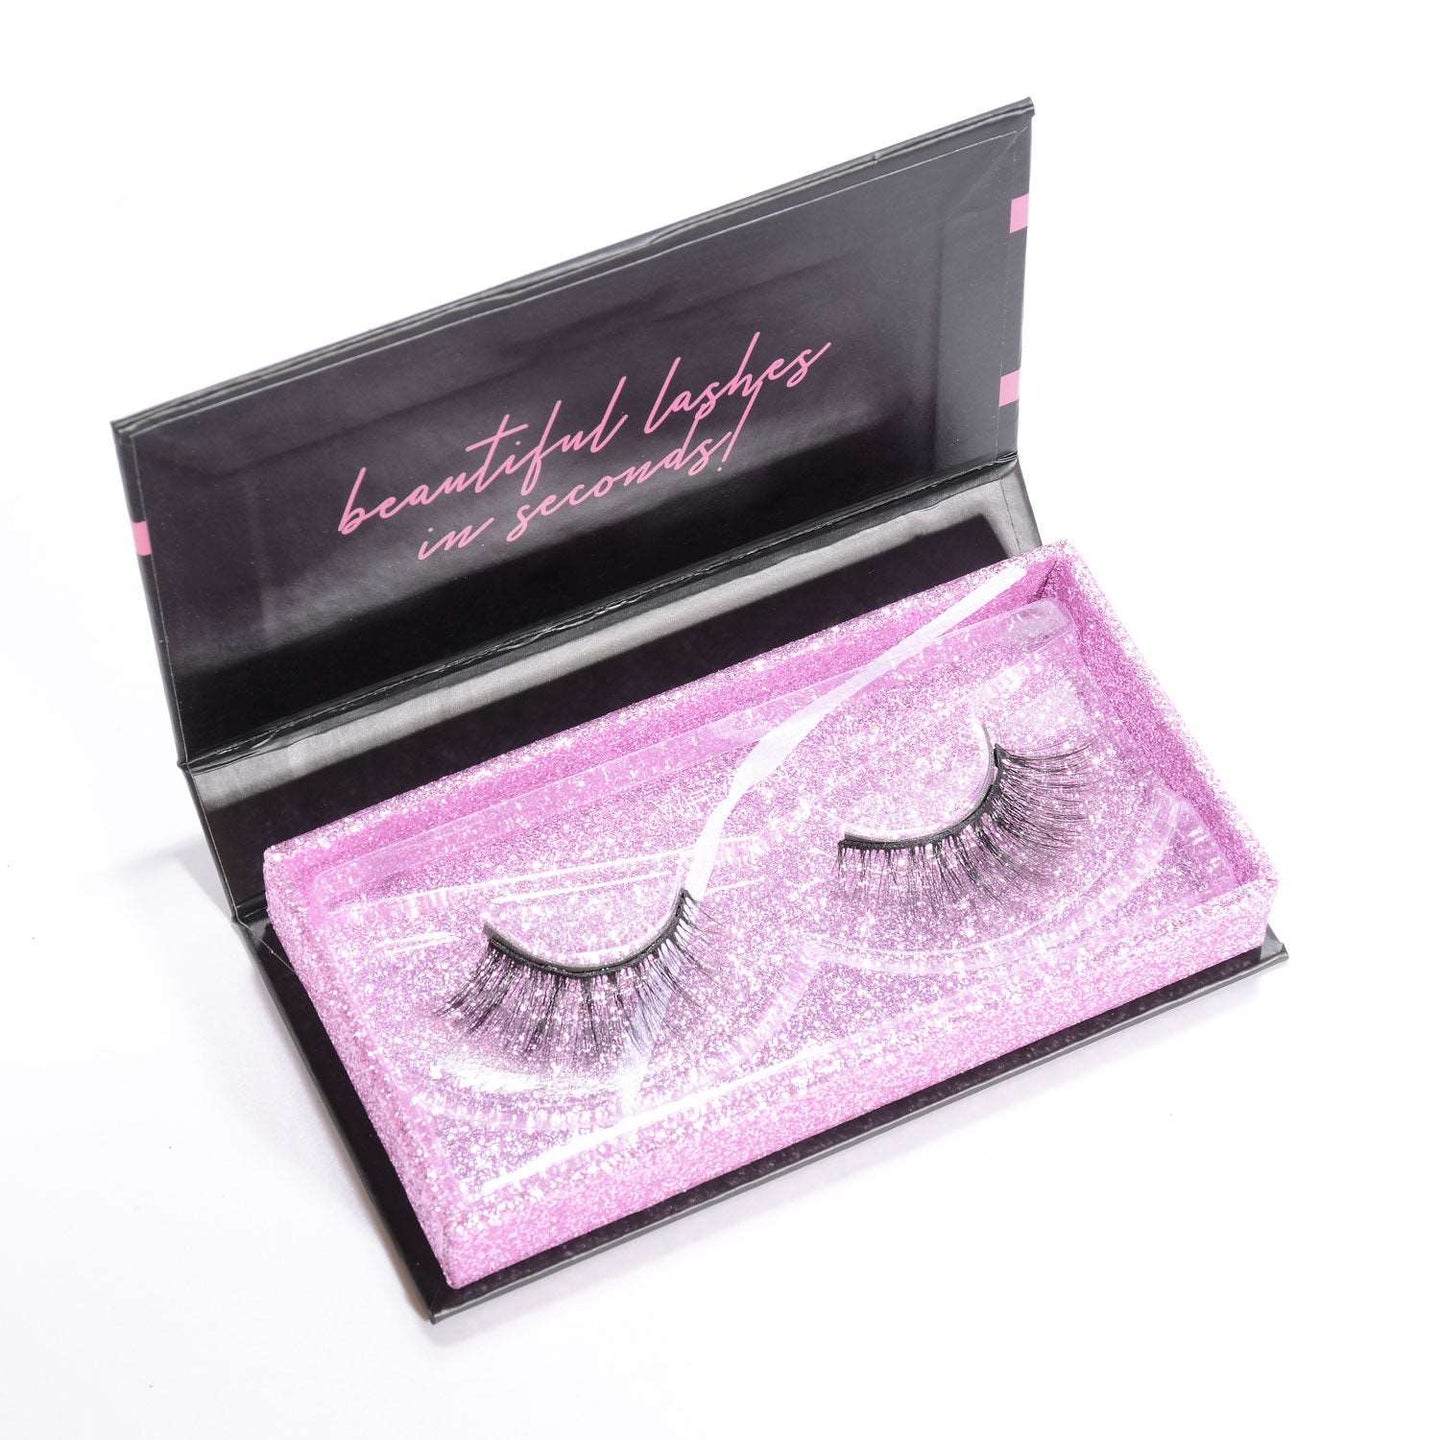 5 Mags Wifey Magnetic Lashes - SindeBella Beauty Store